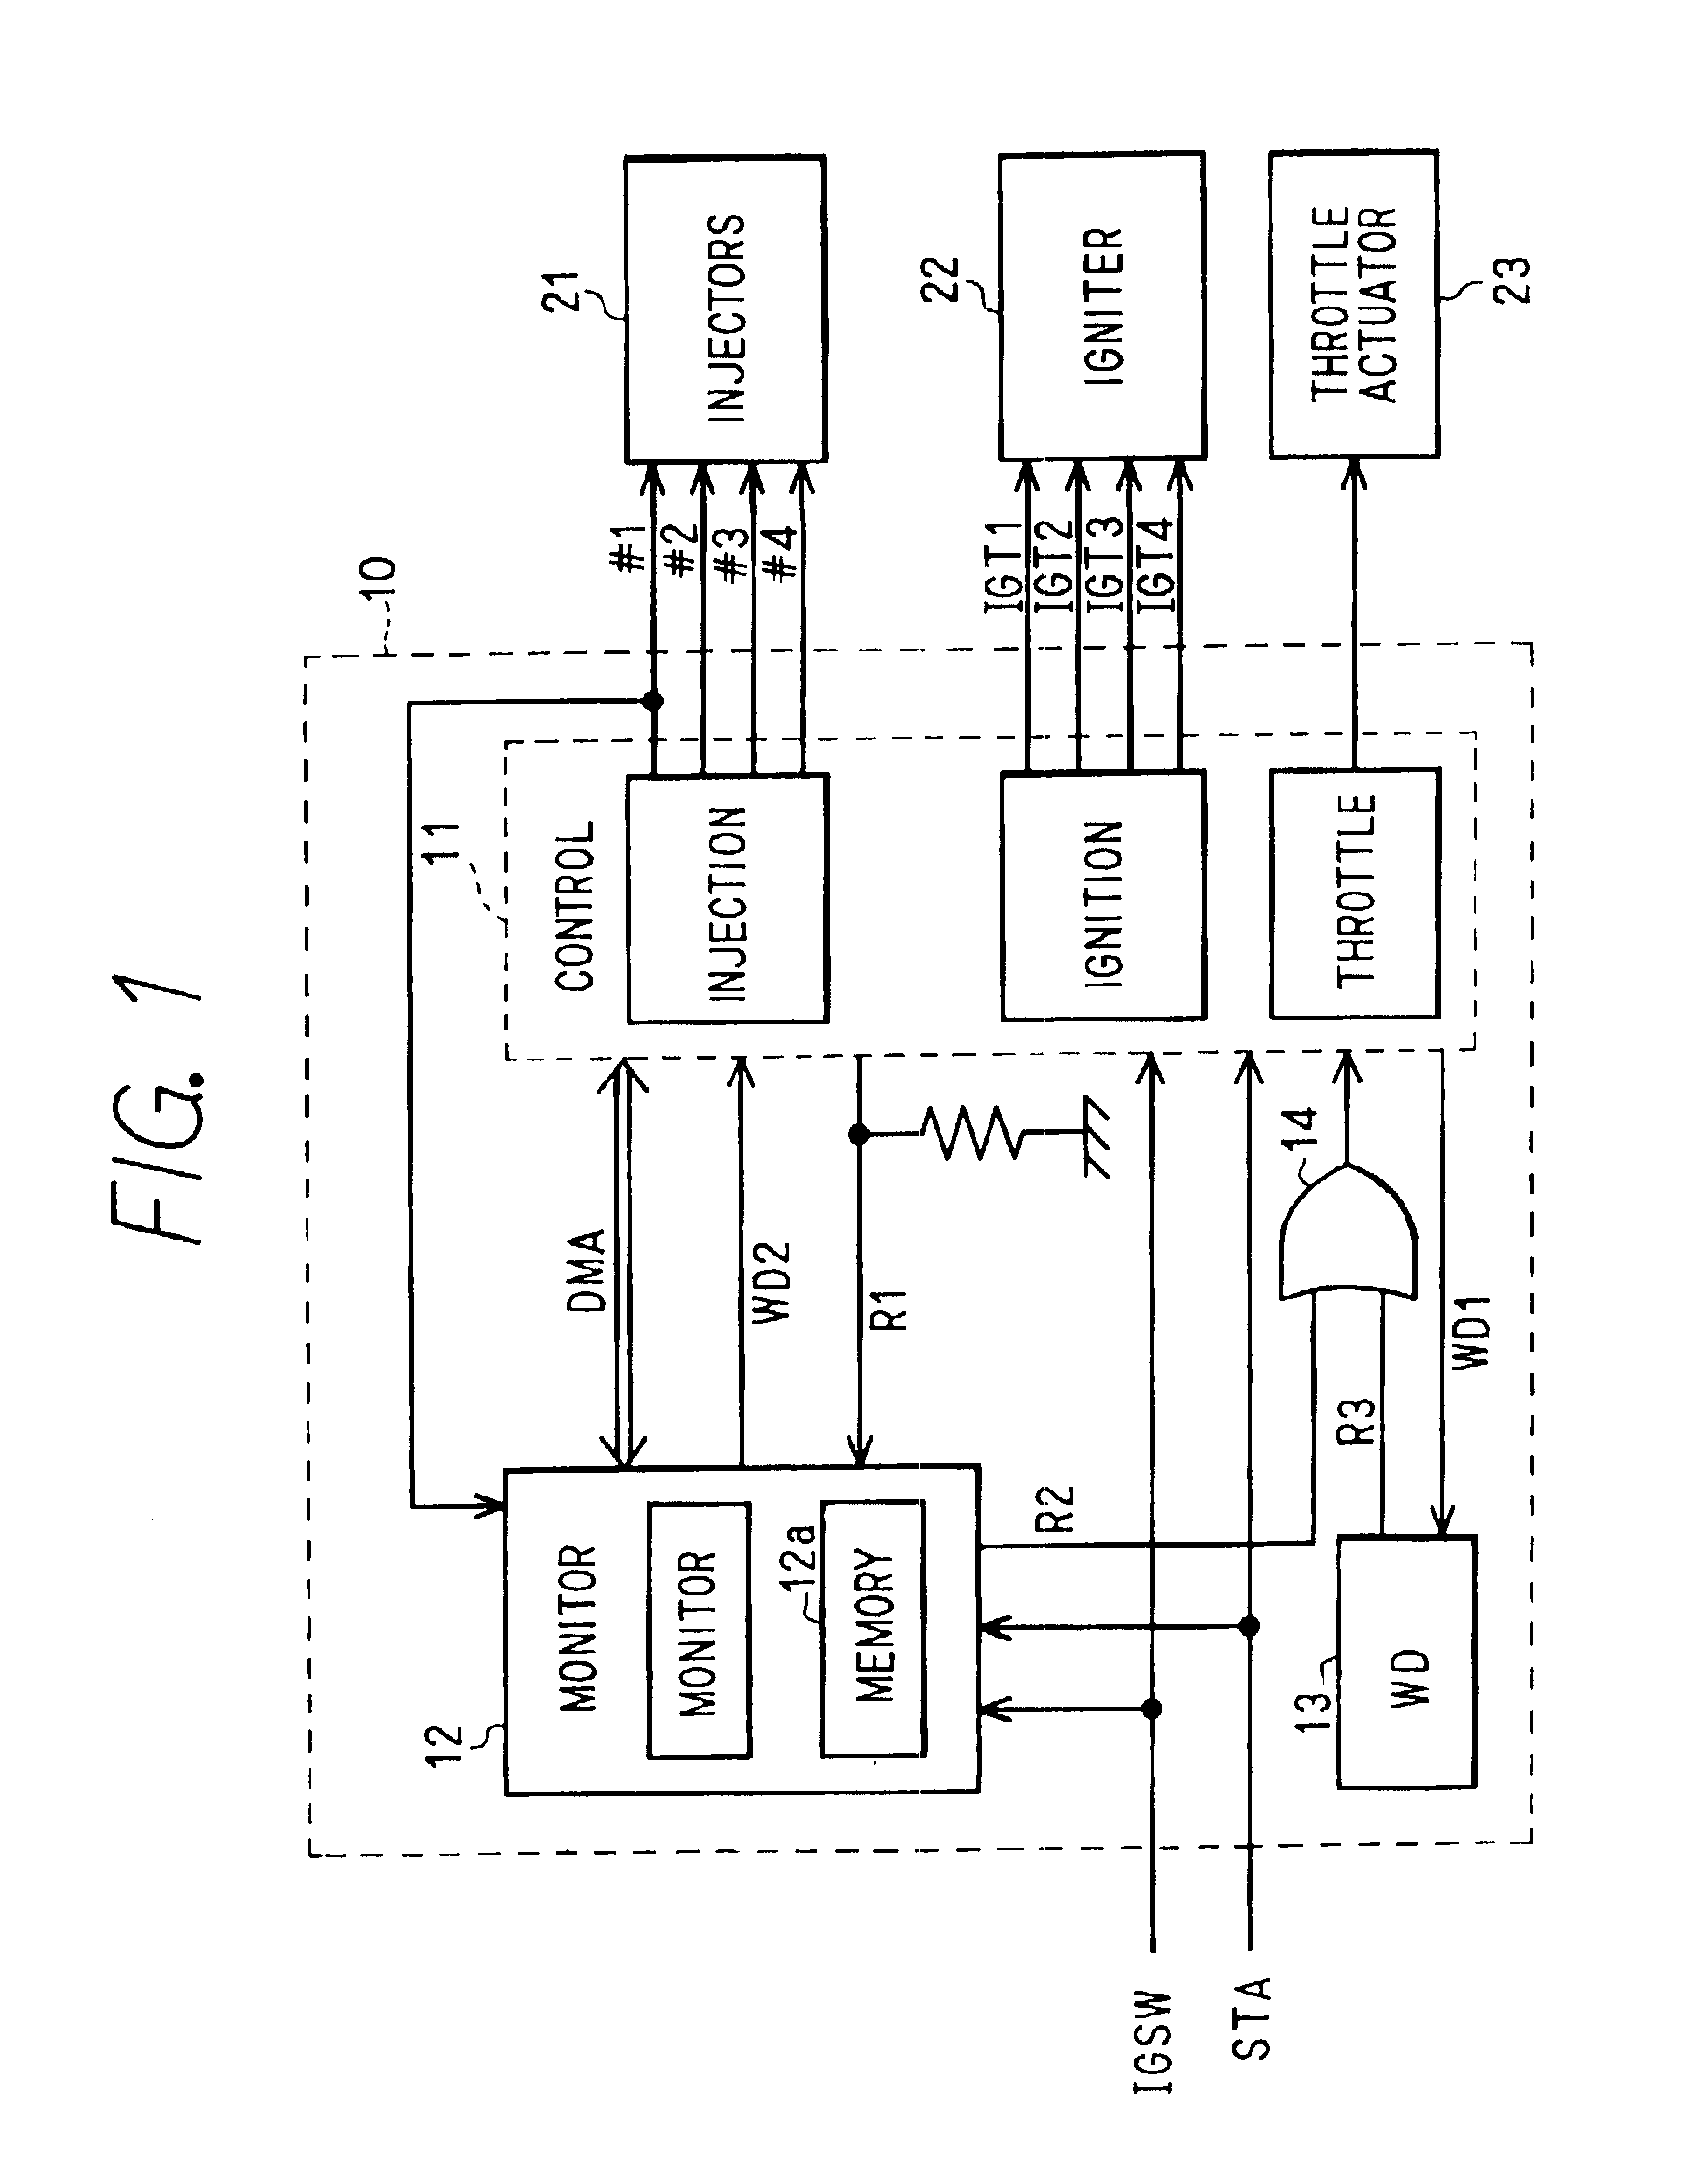 Vehicle electronic control system and method having fail-safe function